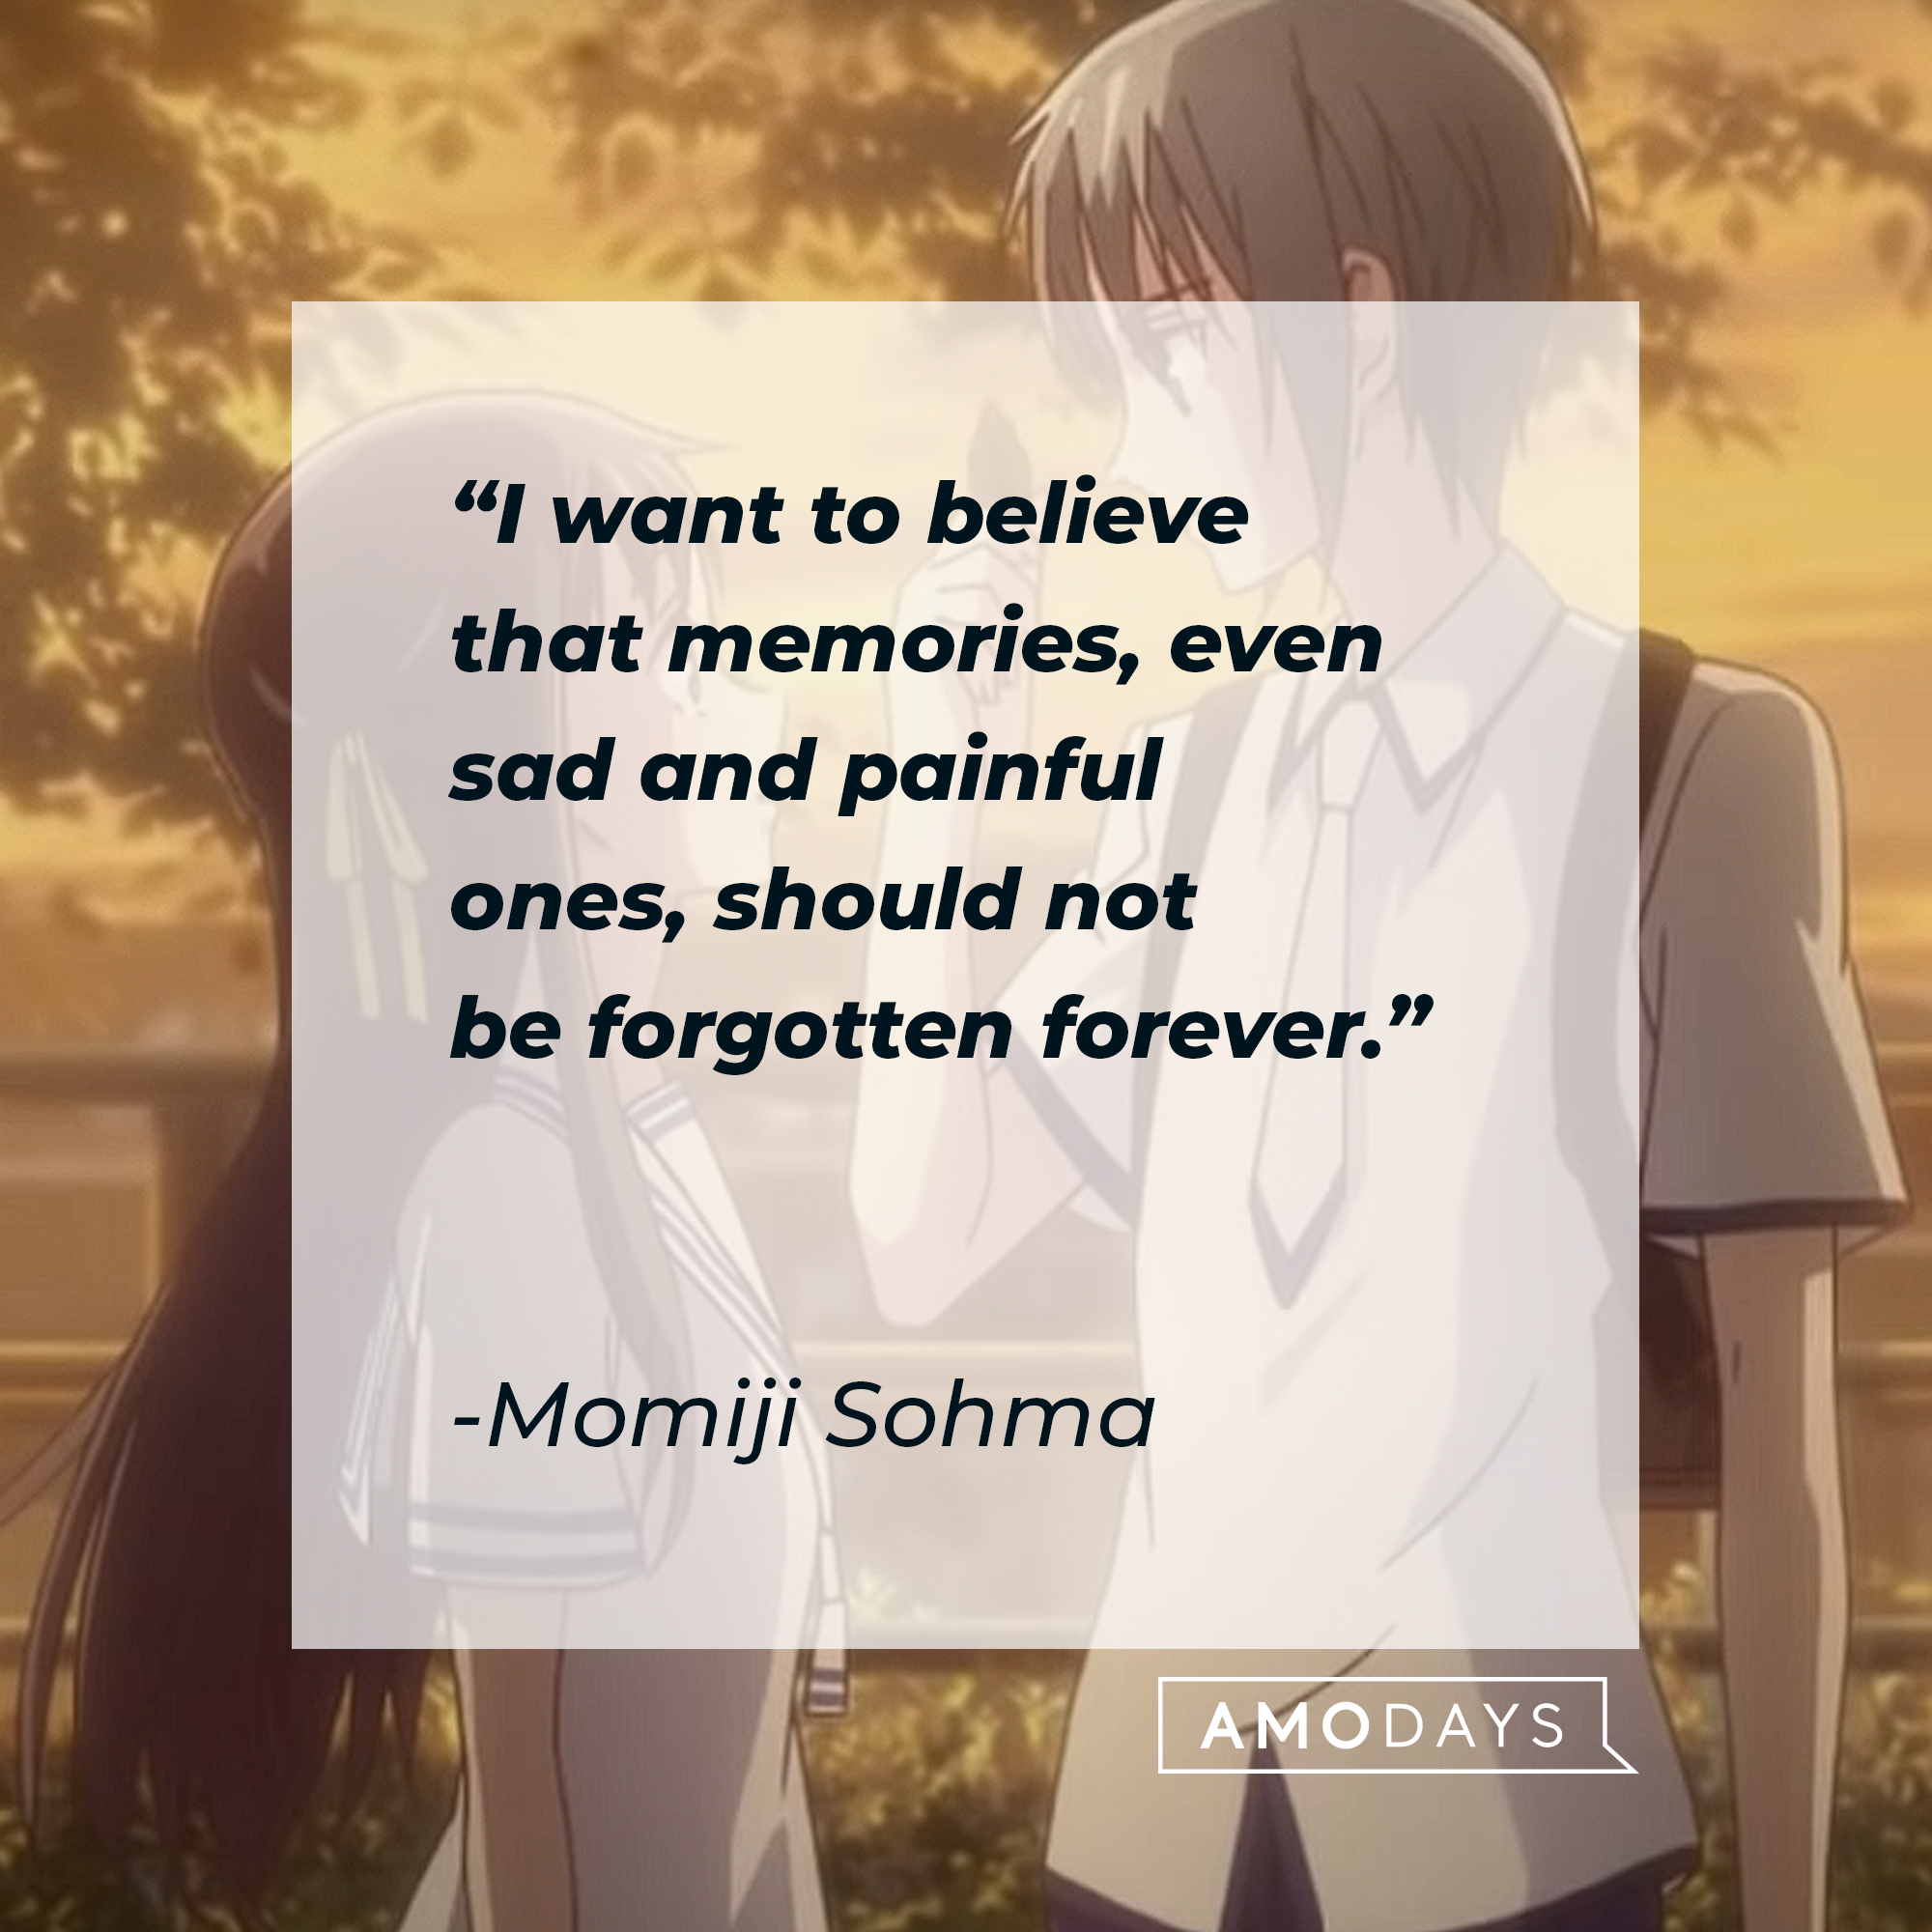 Momiji Sohma's quote: "I want to believe that memories, even sad and painful ones, should not be forgotten forever." | Image: youtube.com/Crunchyroll Collection